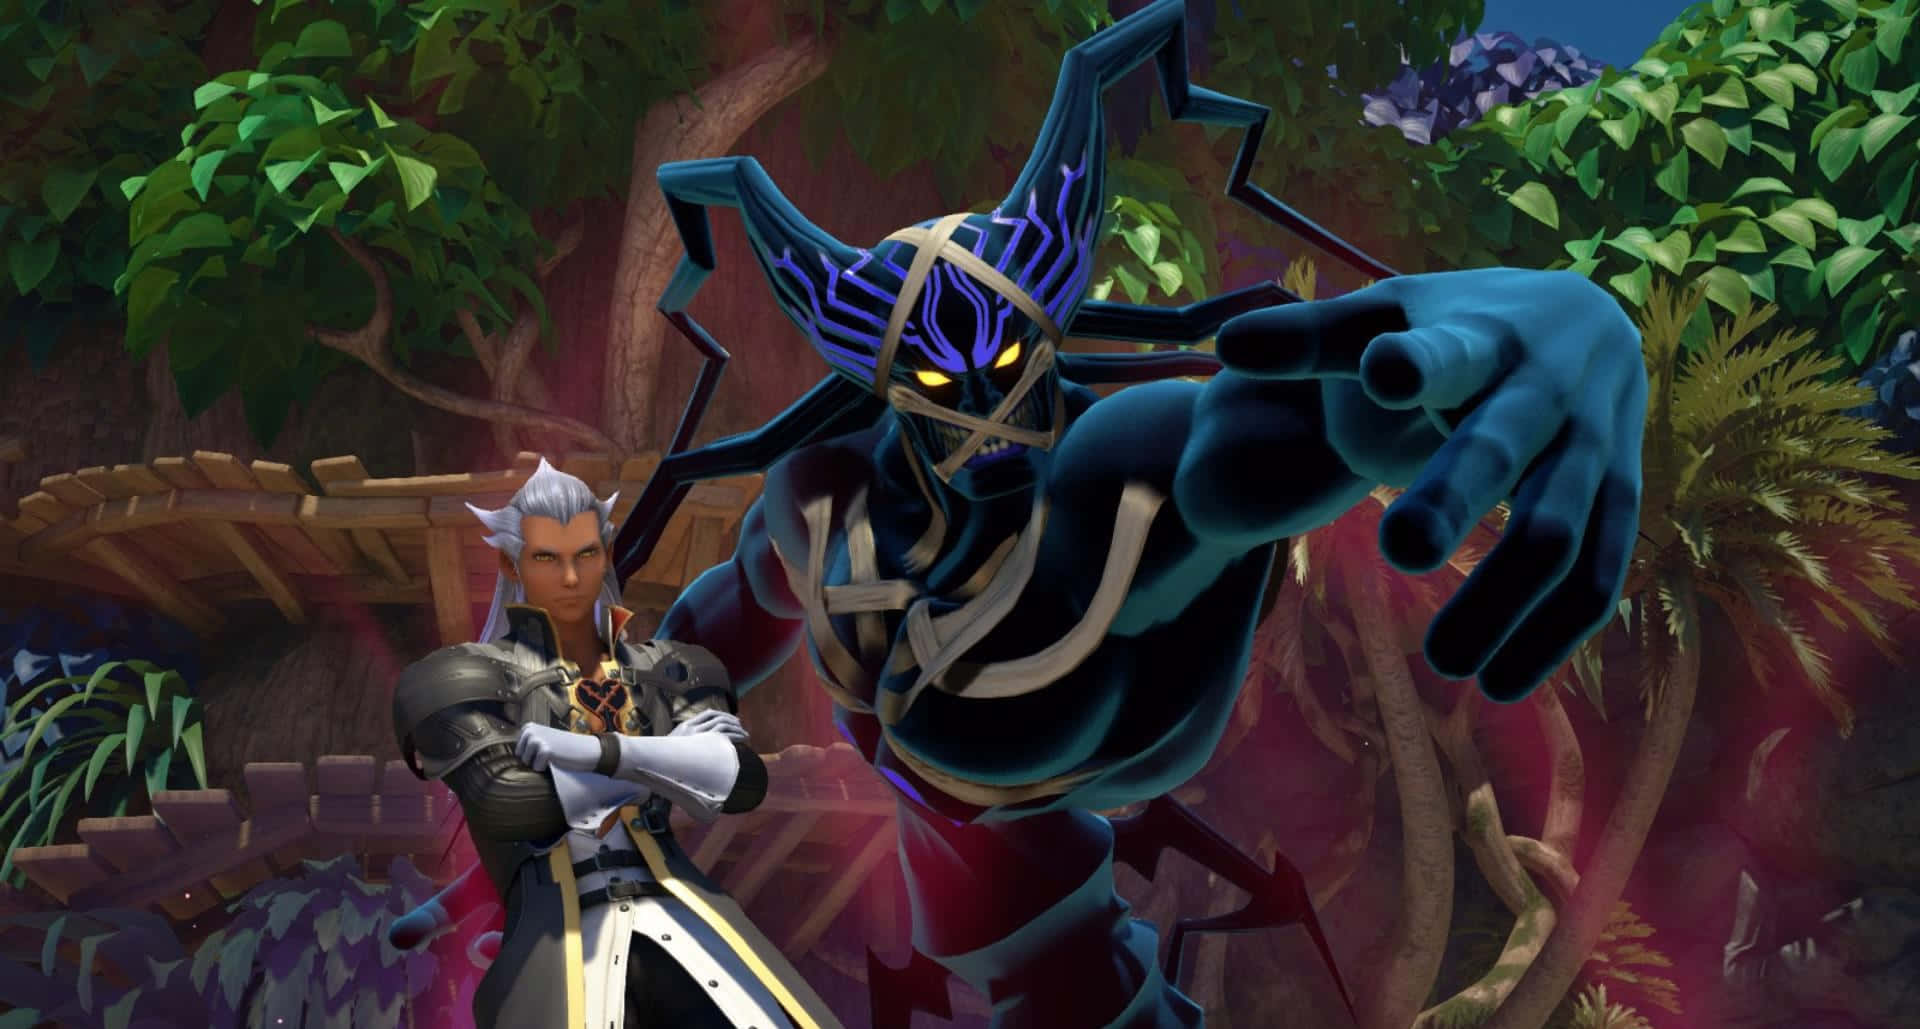 Ansem Seeker of Darkness in his iconic pose, captivating and intimidating, against a dark background. Wallpaper